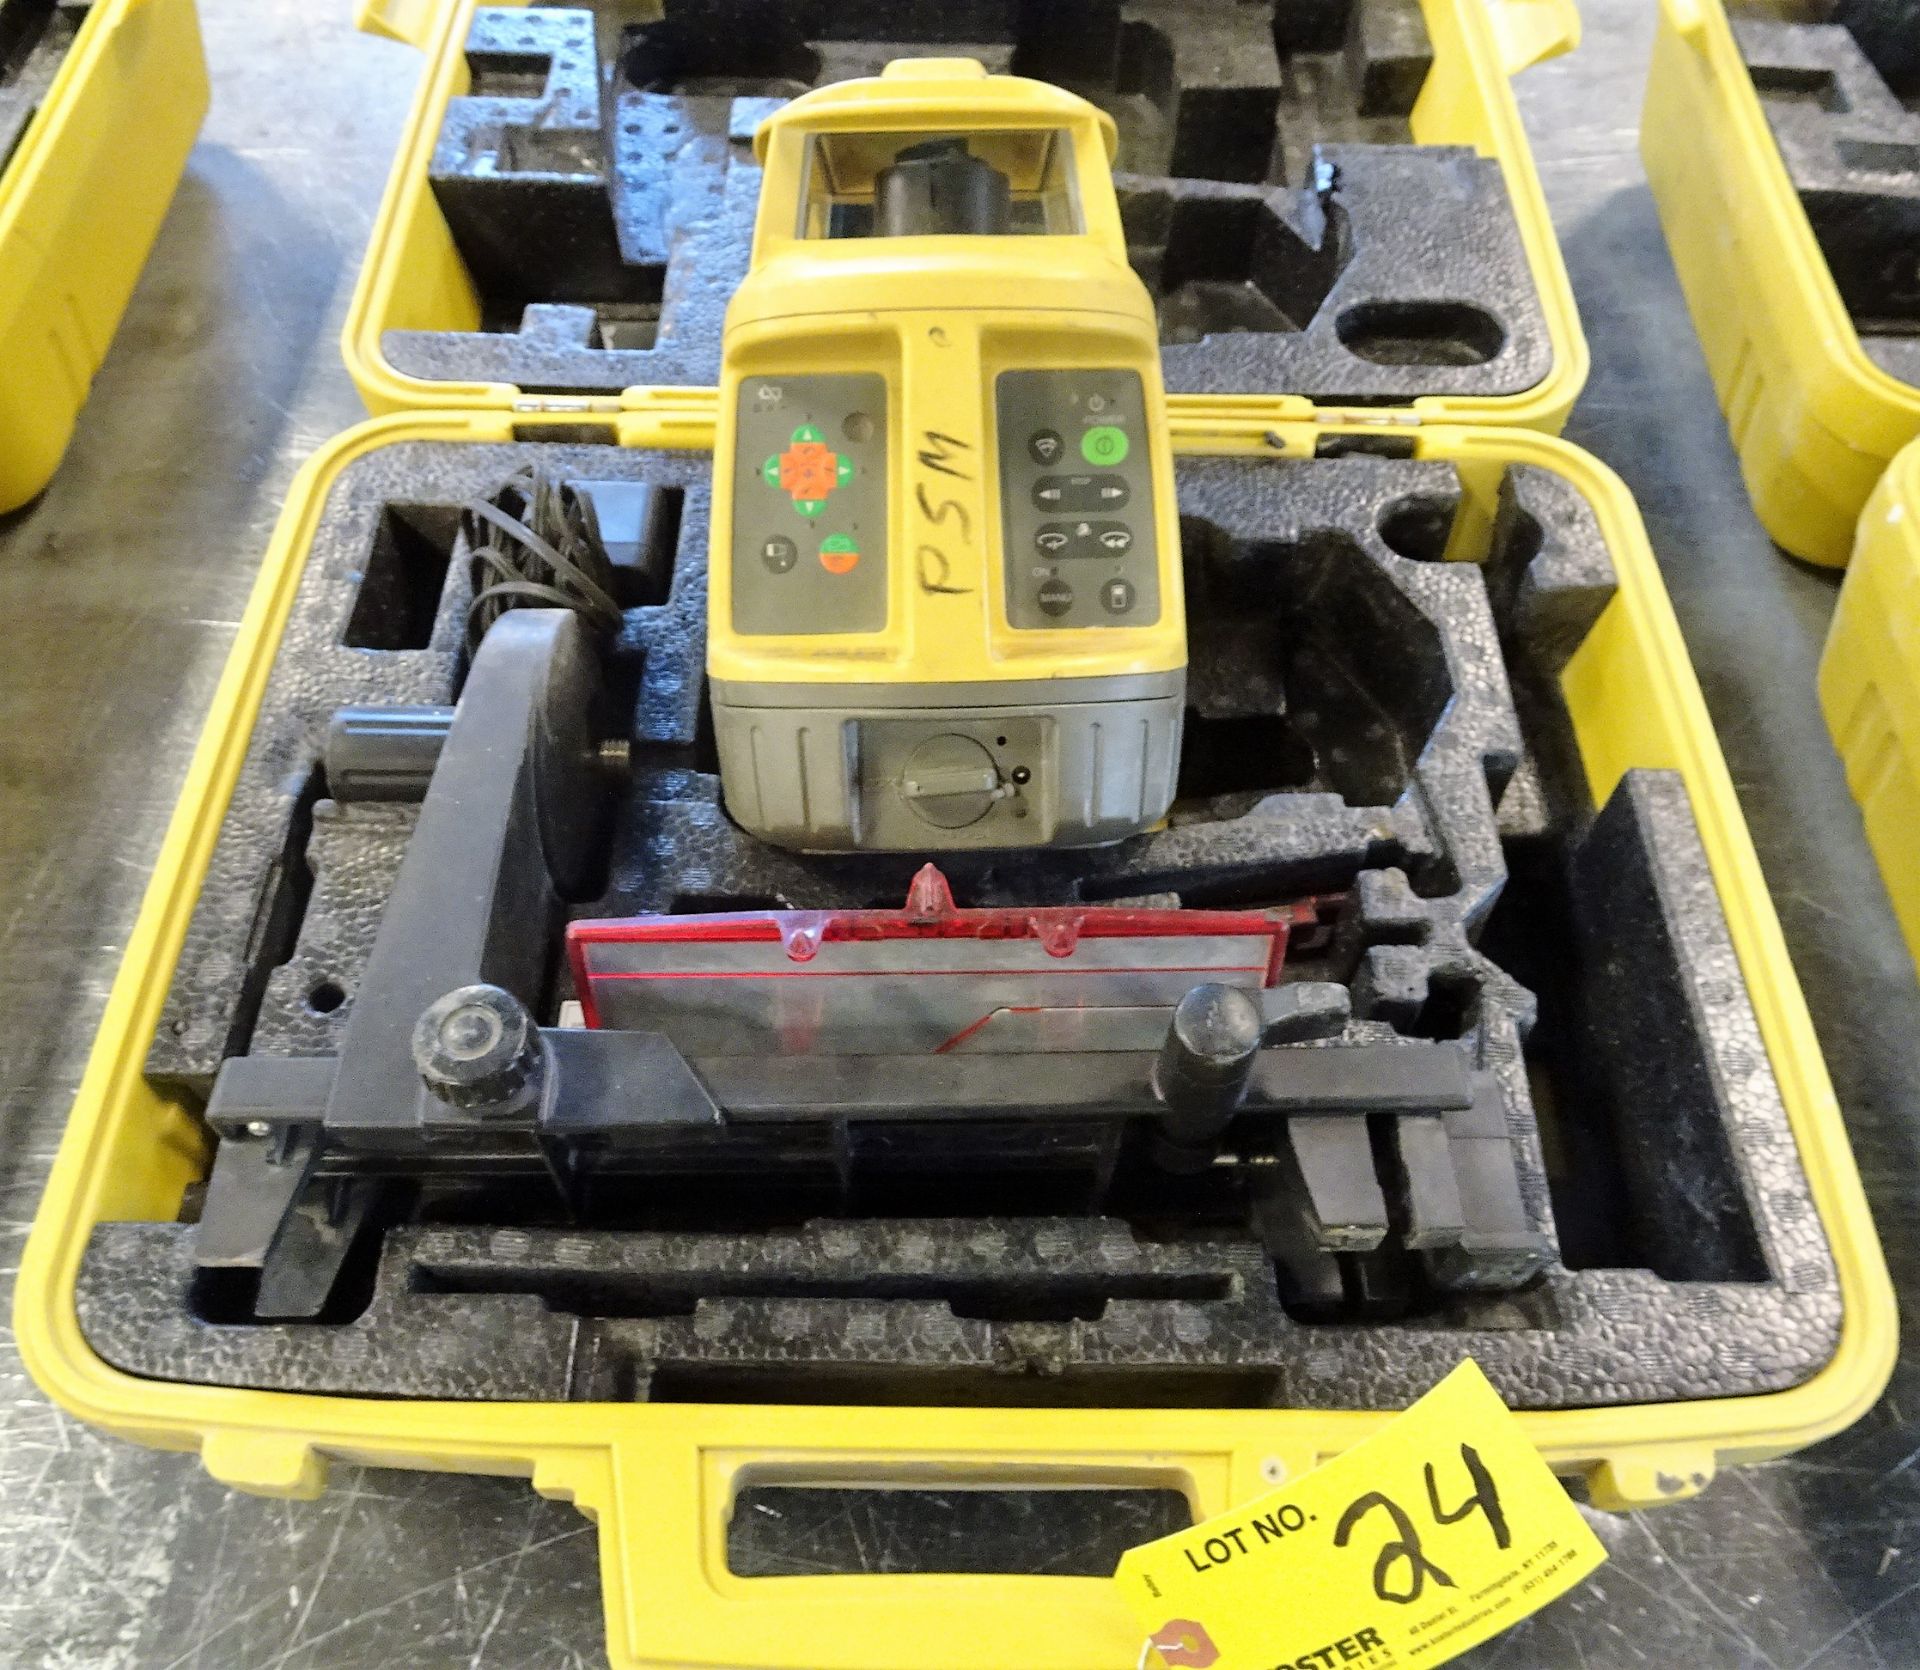 Topcon Mdl. RLVH3B Rotating Leveling Laser, with Associated Accessories and Case - Image 2 of 2